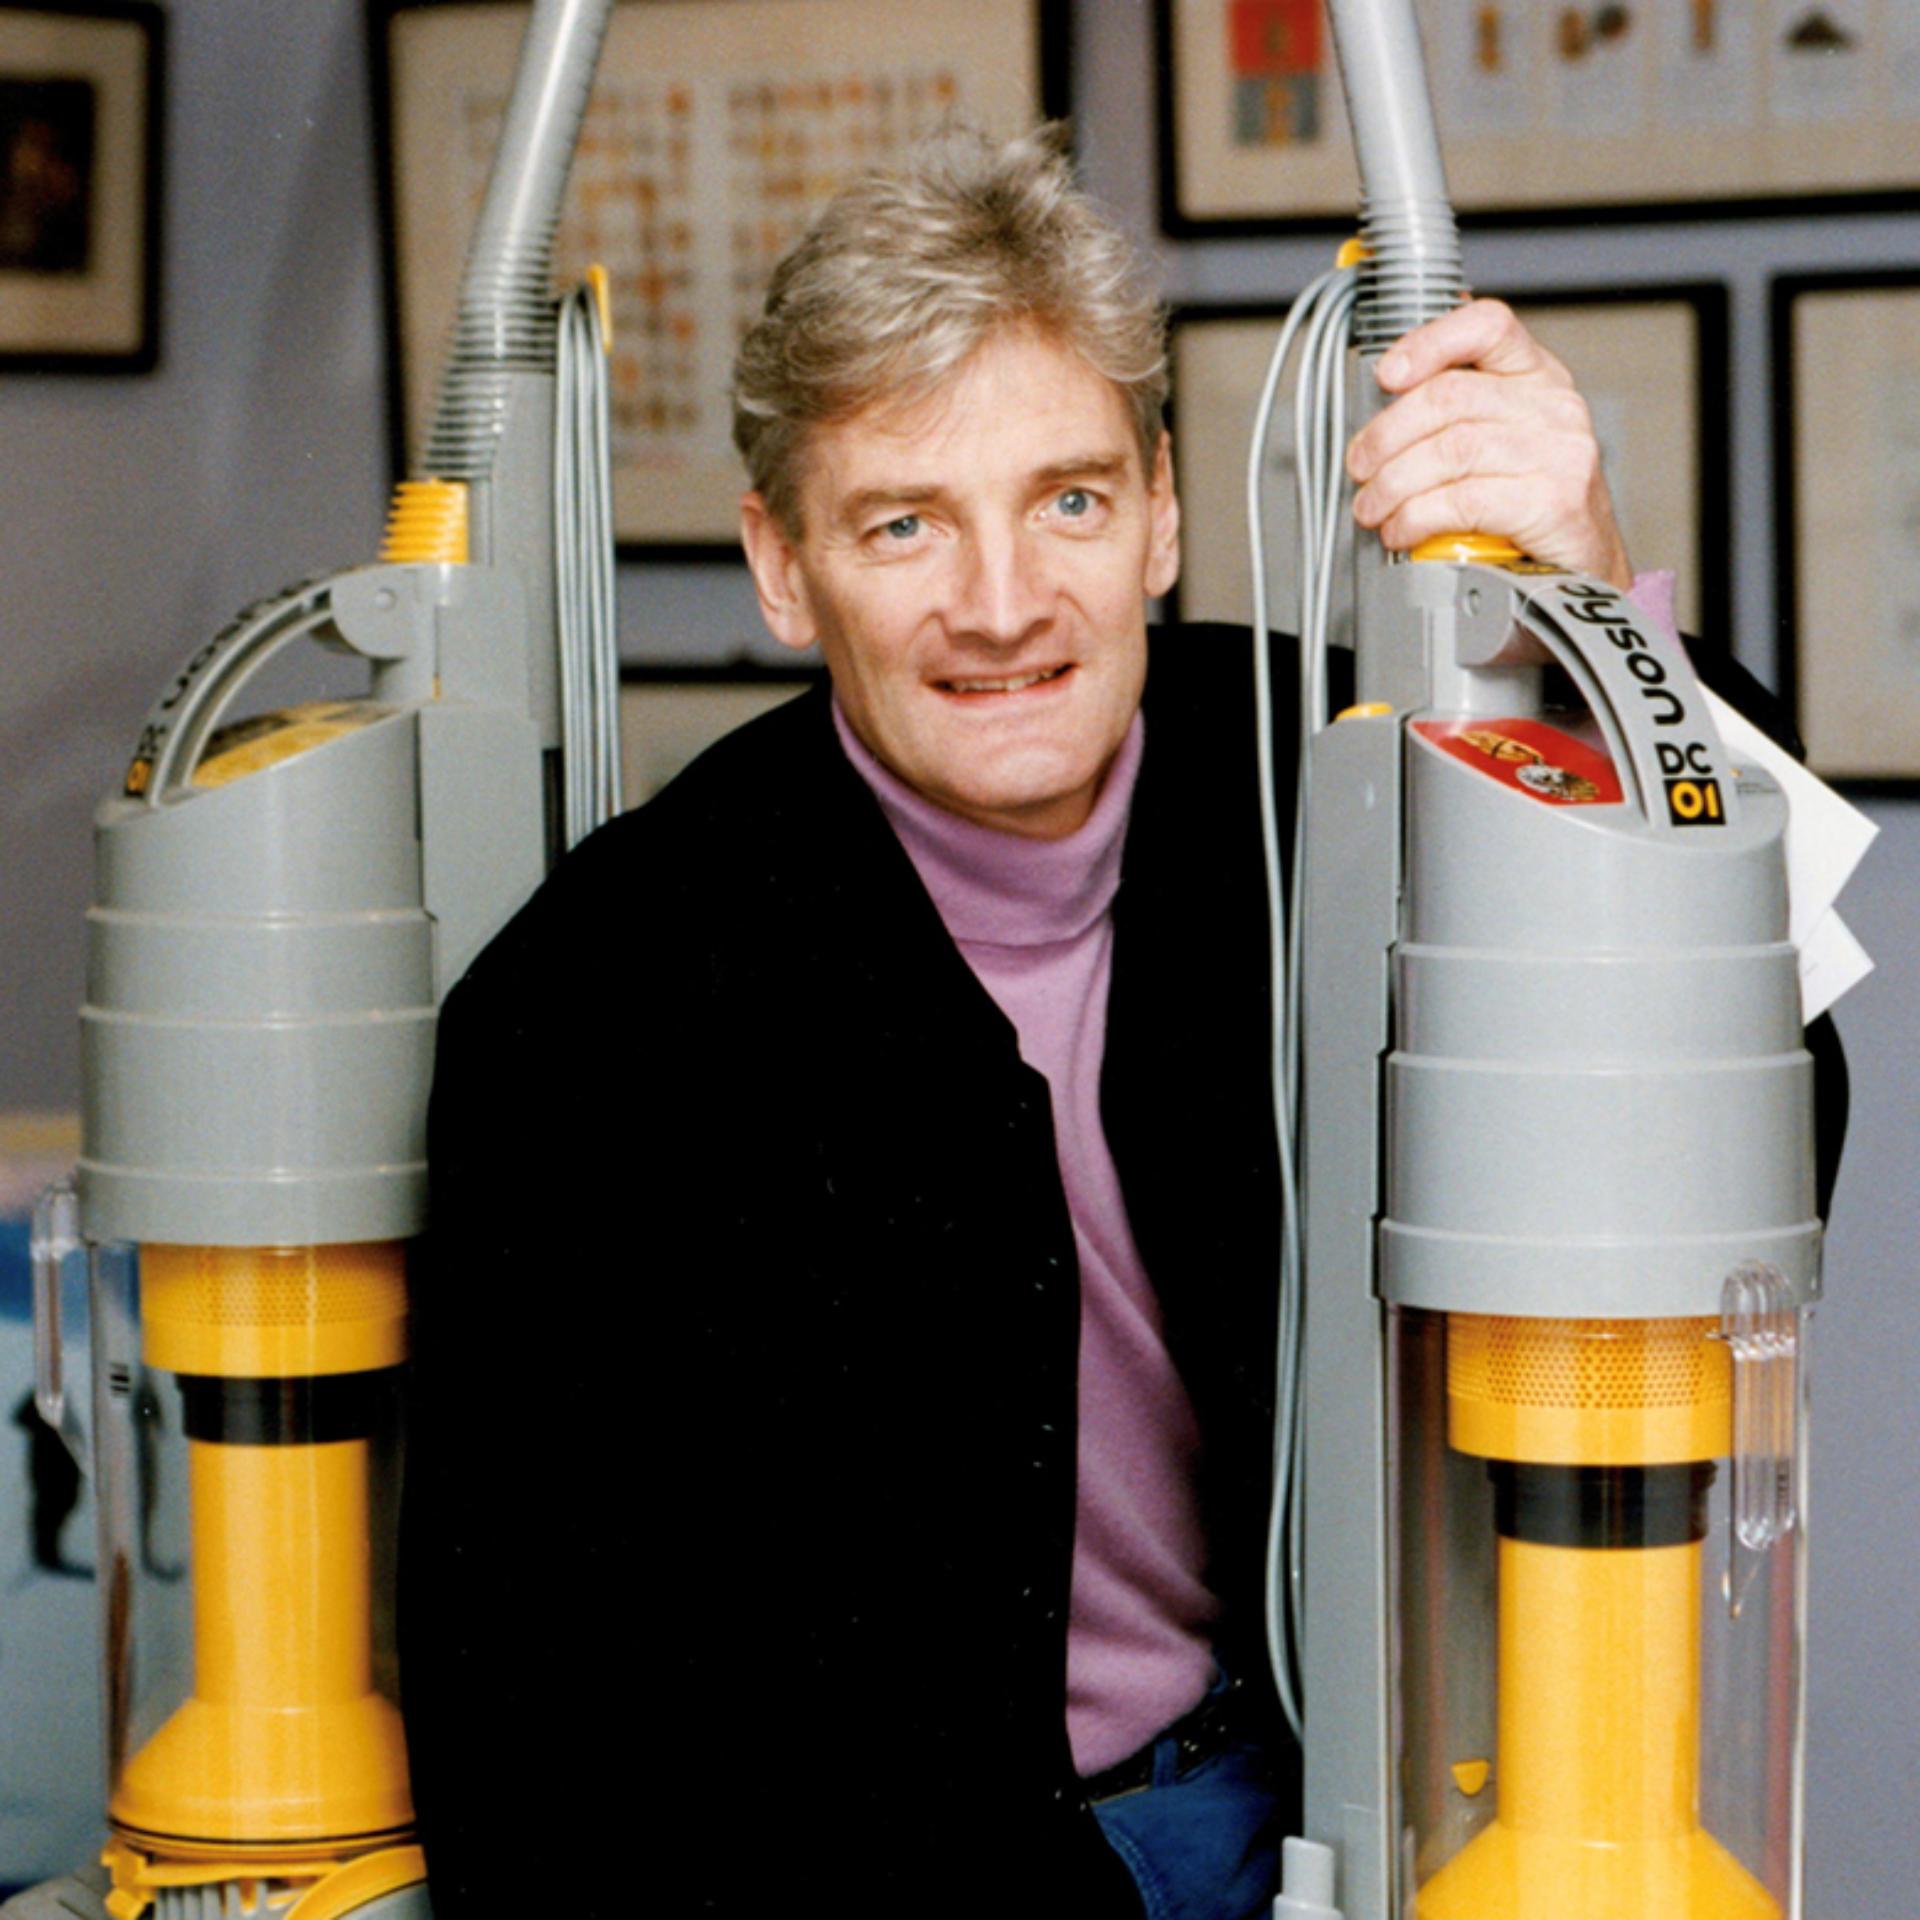 James Dyson photographed with DC01s in 1993